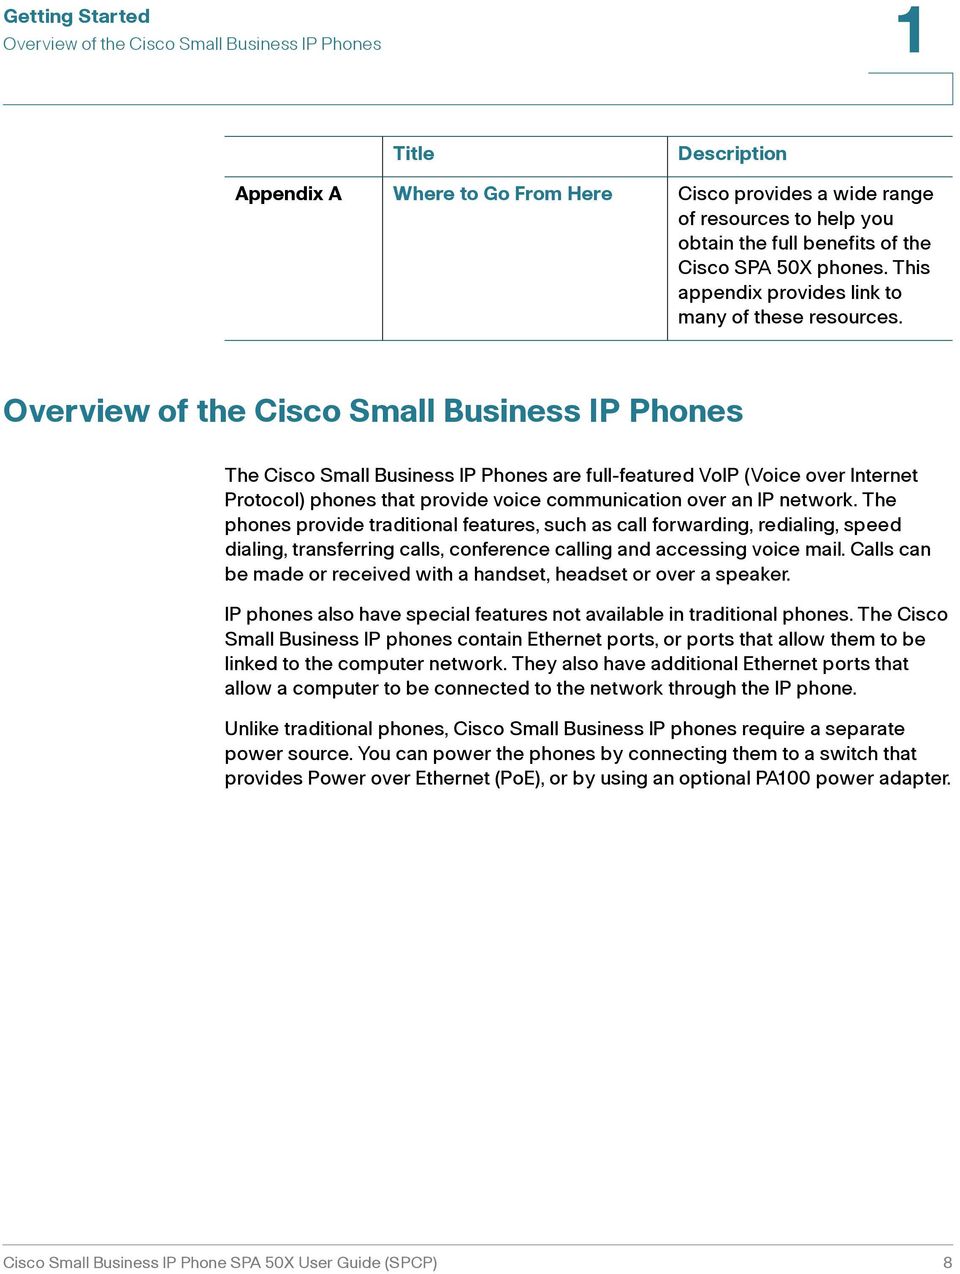 Overview of the Cisco Small Business IP Phones The Cisco Small Business IP Phones are full-featured VoIP (Voice over Internet Protocol) phones that provide voice communication over an IP network.